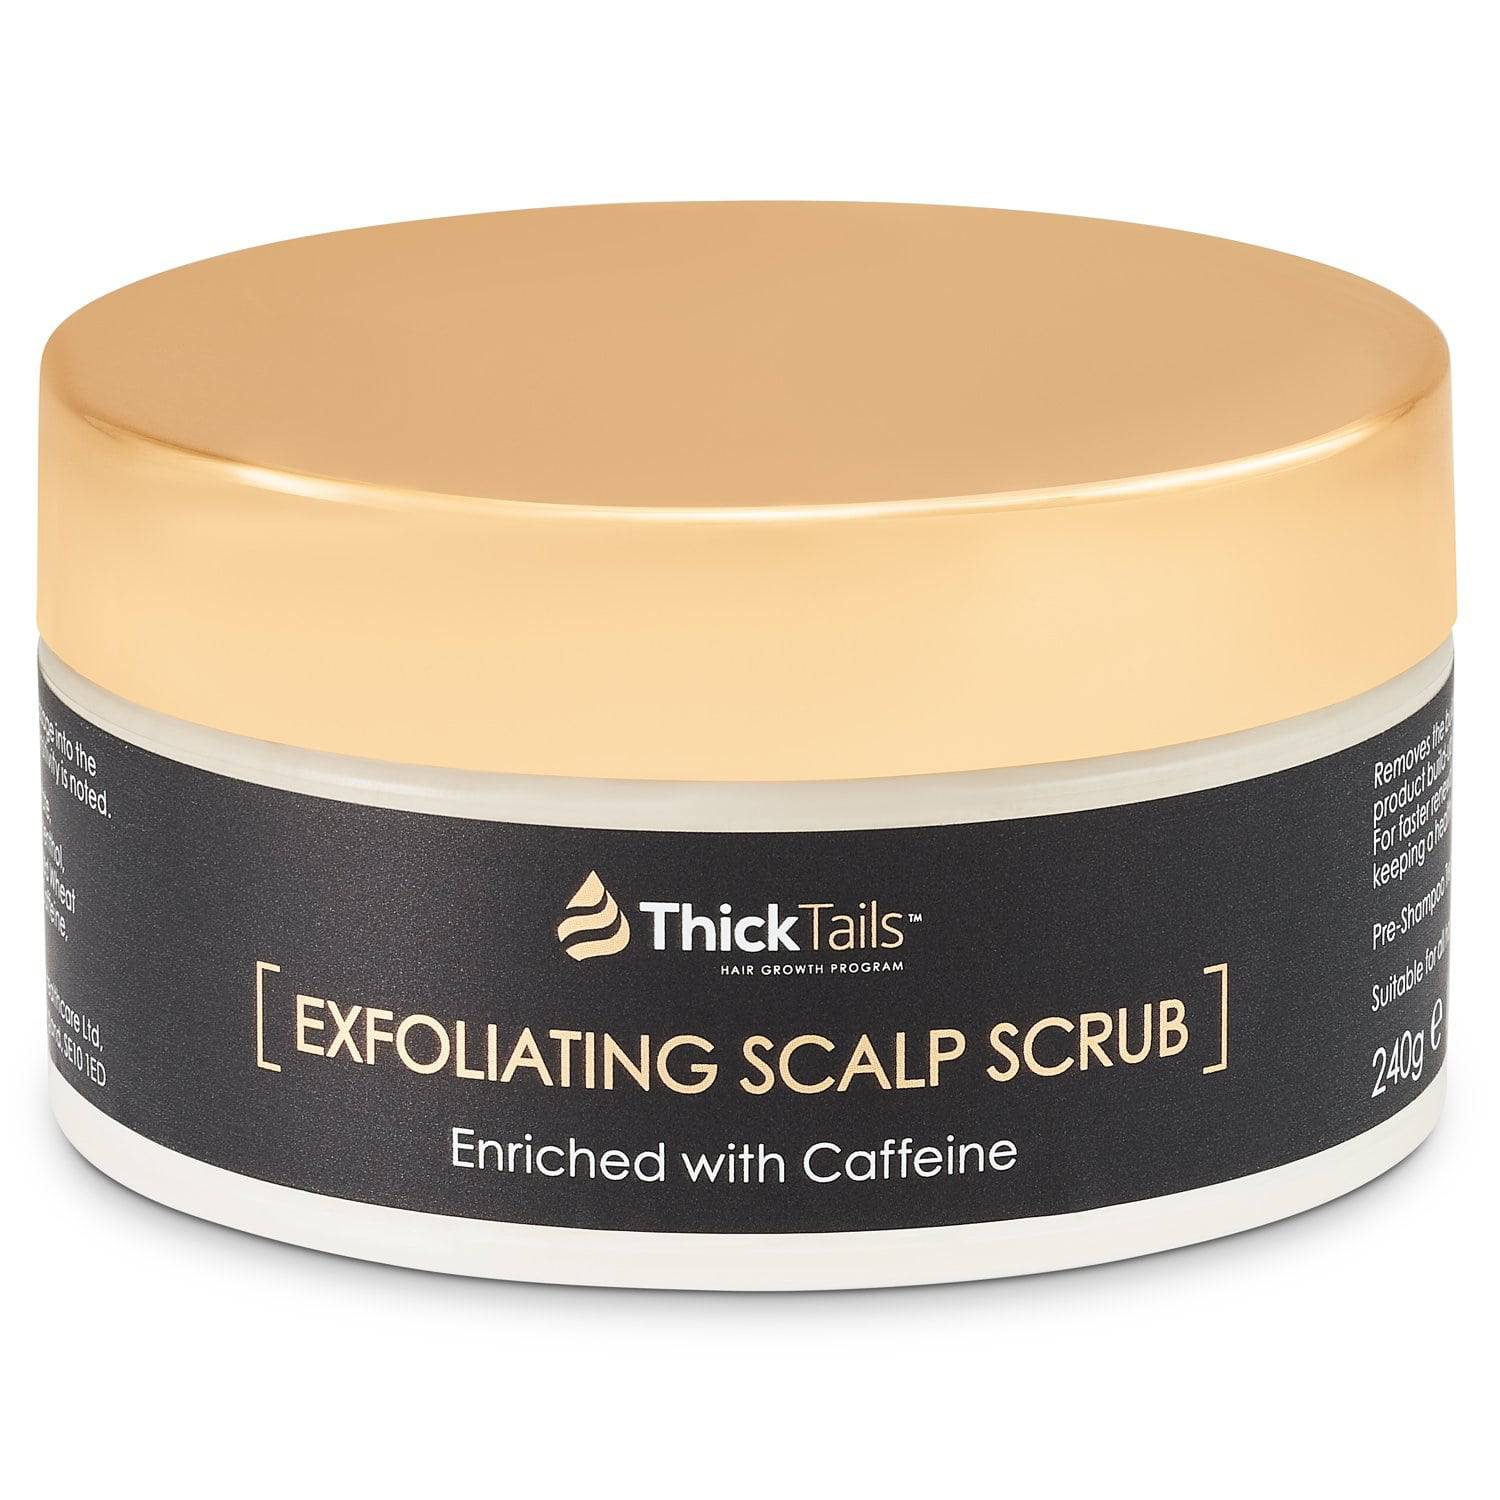 ThickTails Exfoliating Scalp Scrub Treatment to Soothe a Dry, Flaky, Itchy Scalp | 8.5 fl.oz